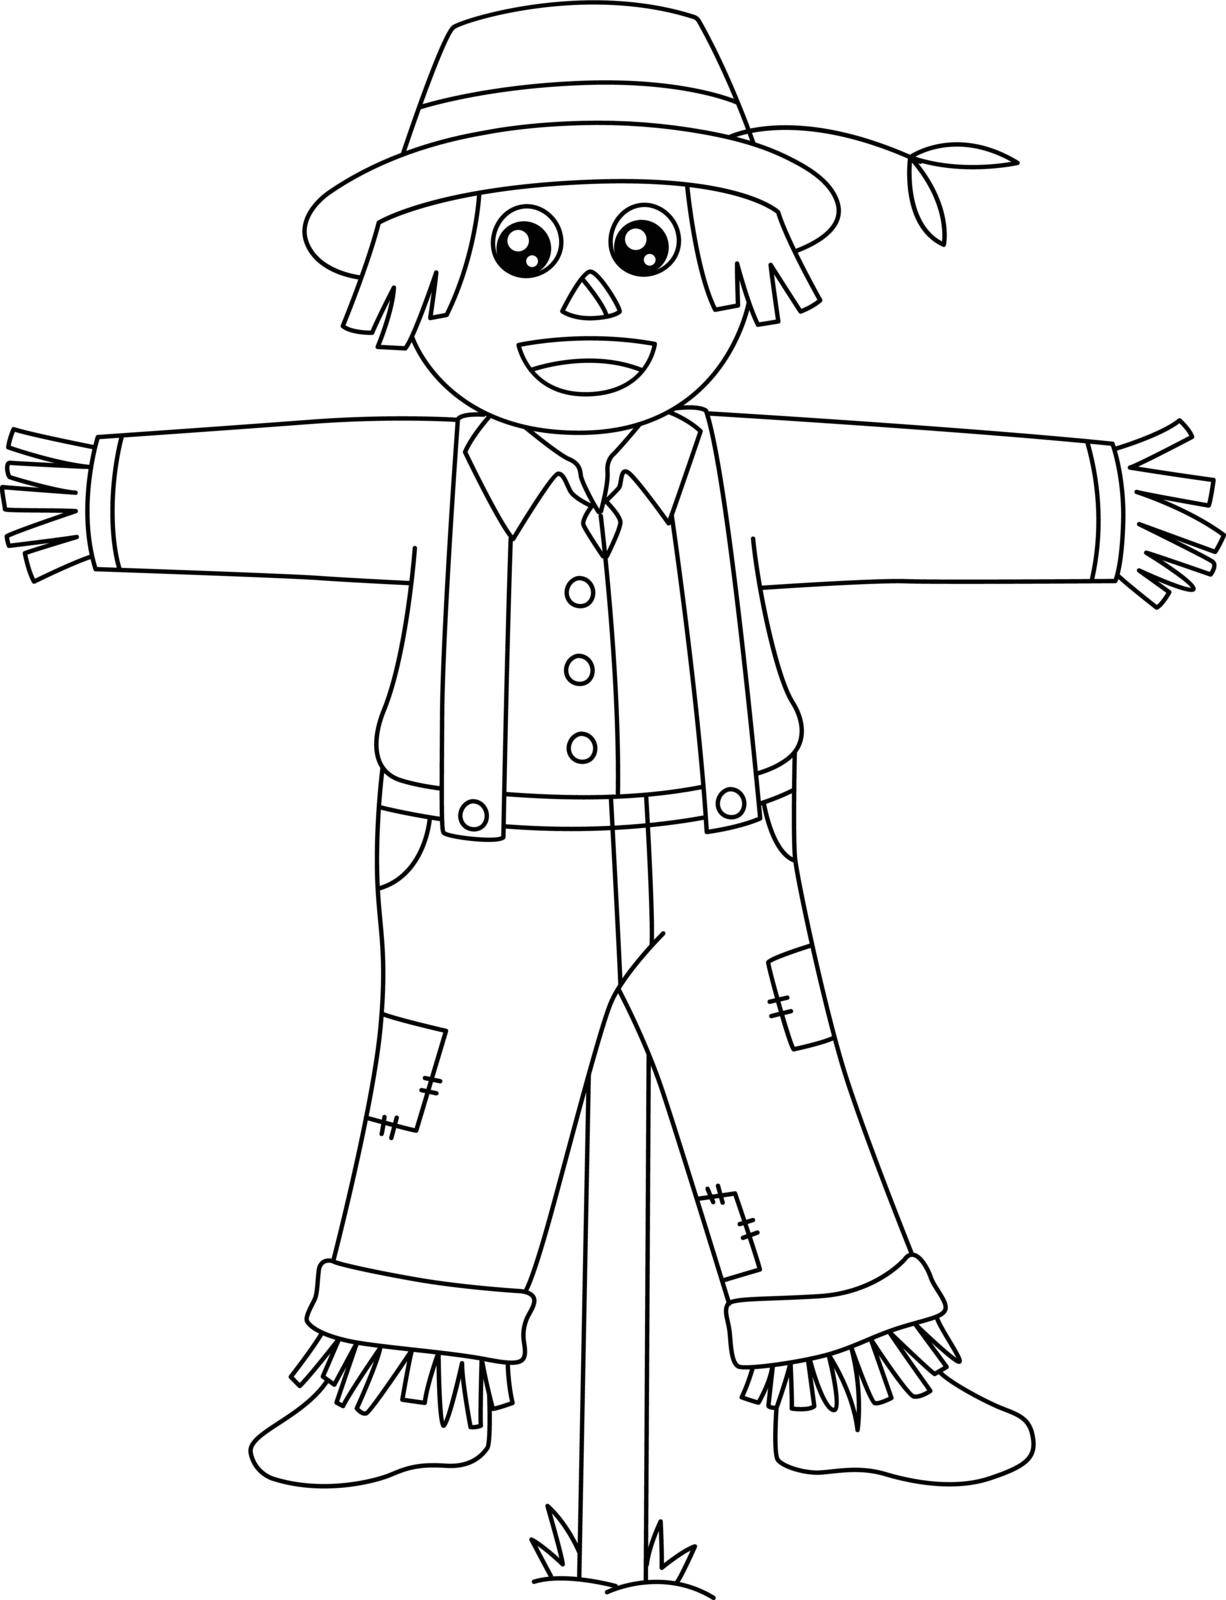 A cute and funny coloring page of a scarecrow. Provides hours of coloring fun for children. To color, this page is very easy. Suitable for little kids and toddlers.